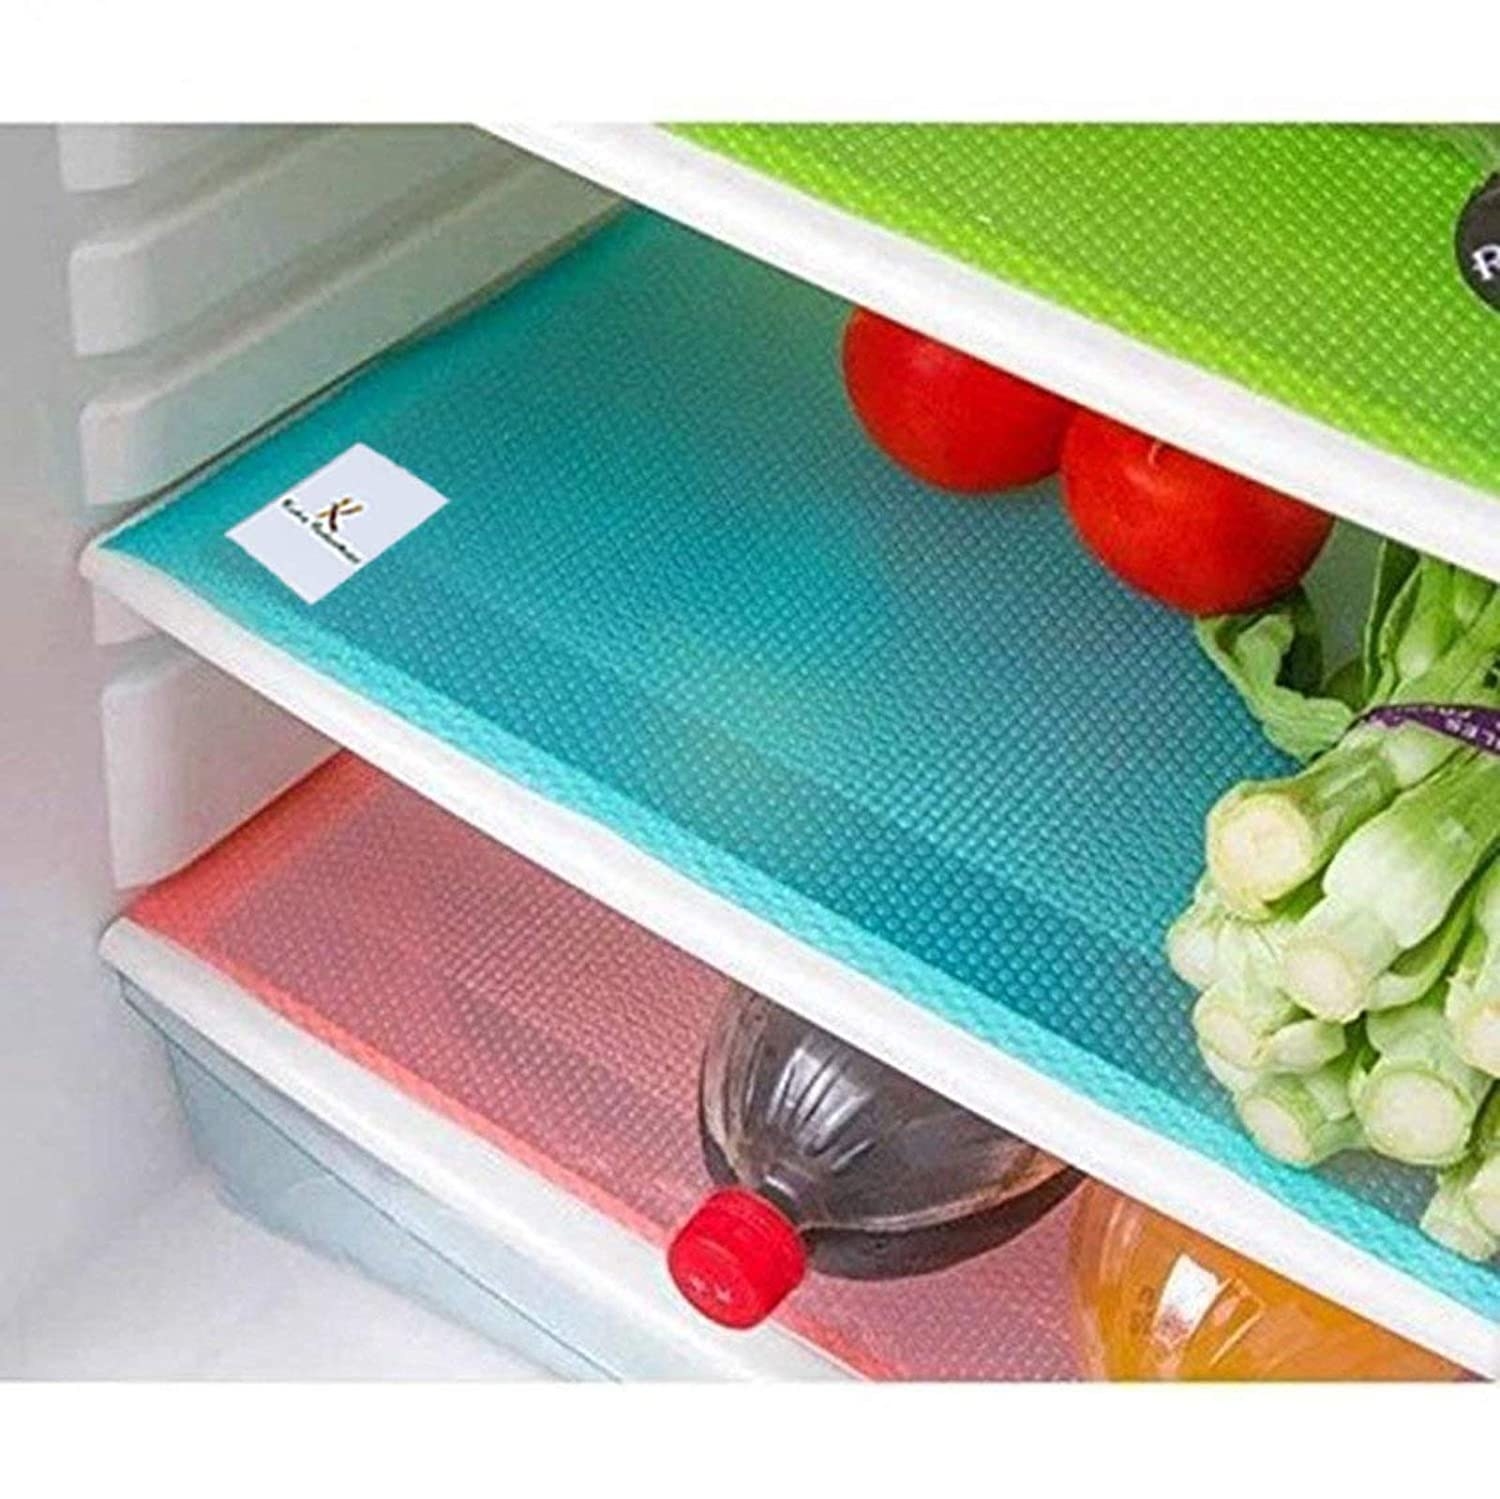 Red, blue and green mats in fridge with vegetables and beverages on top of them